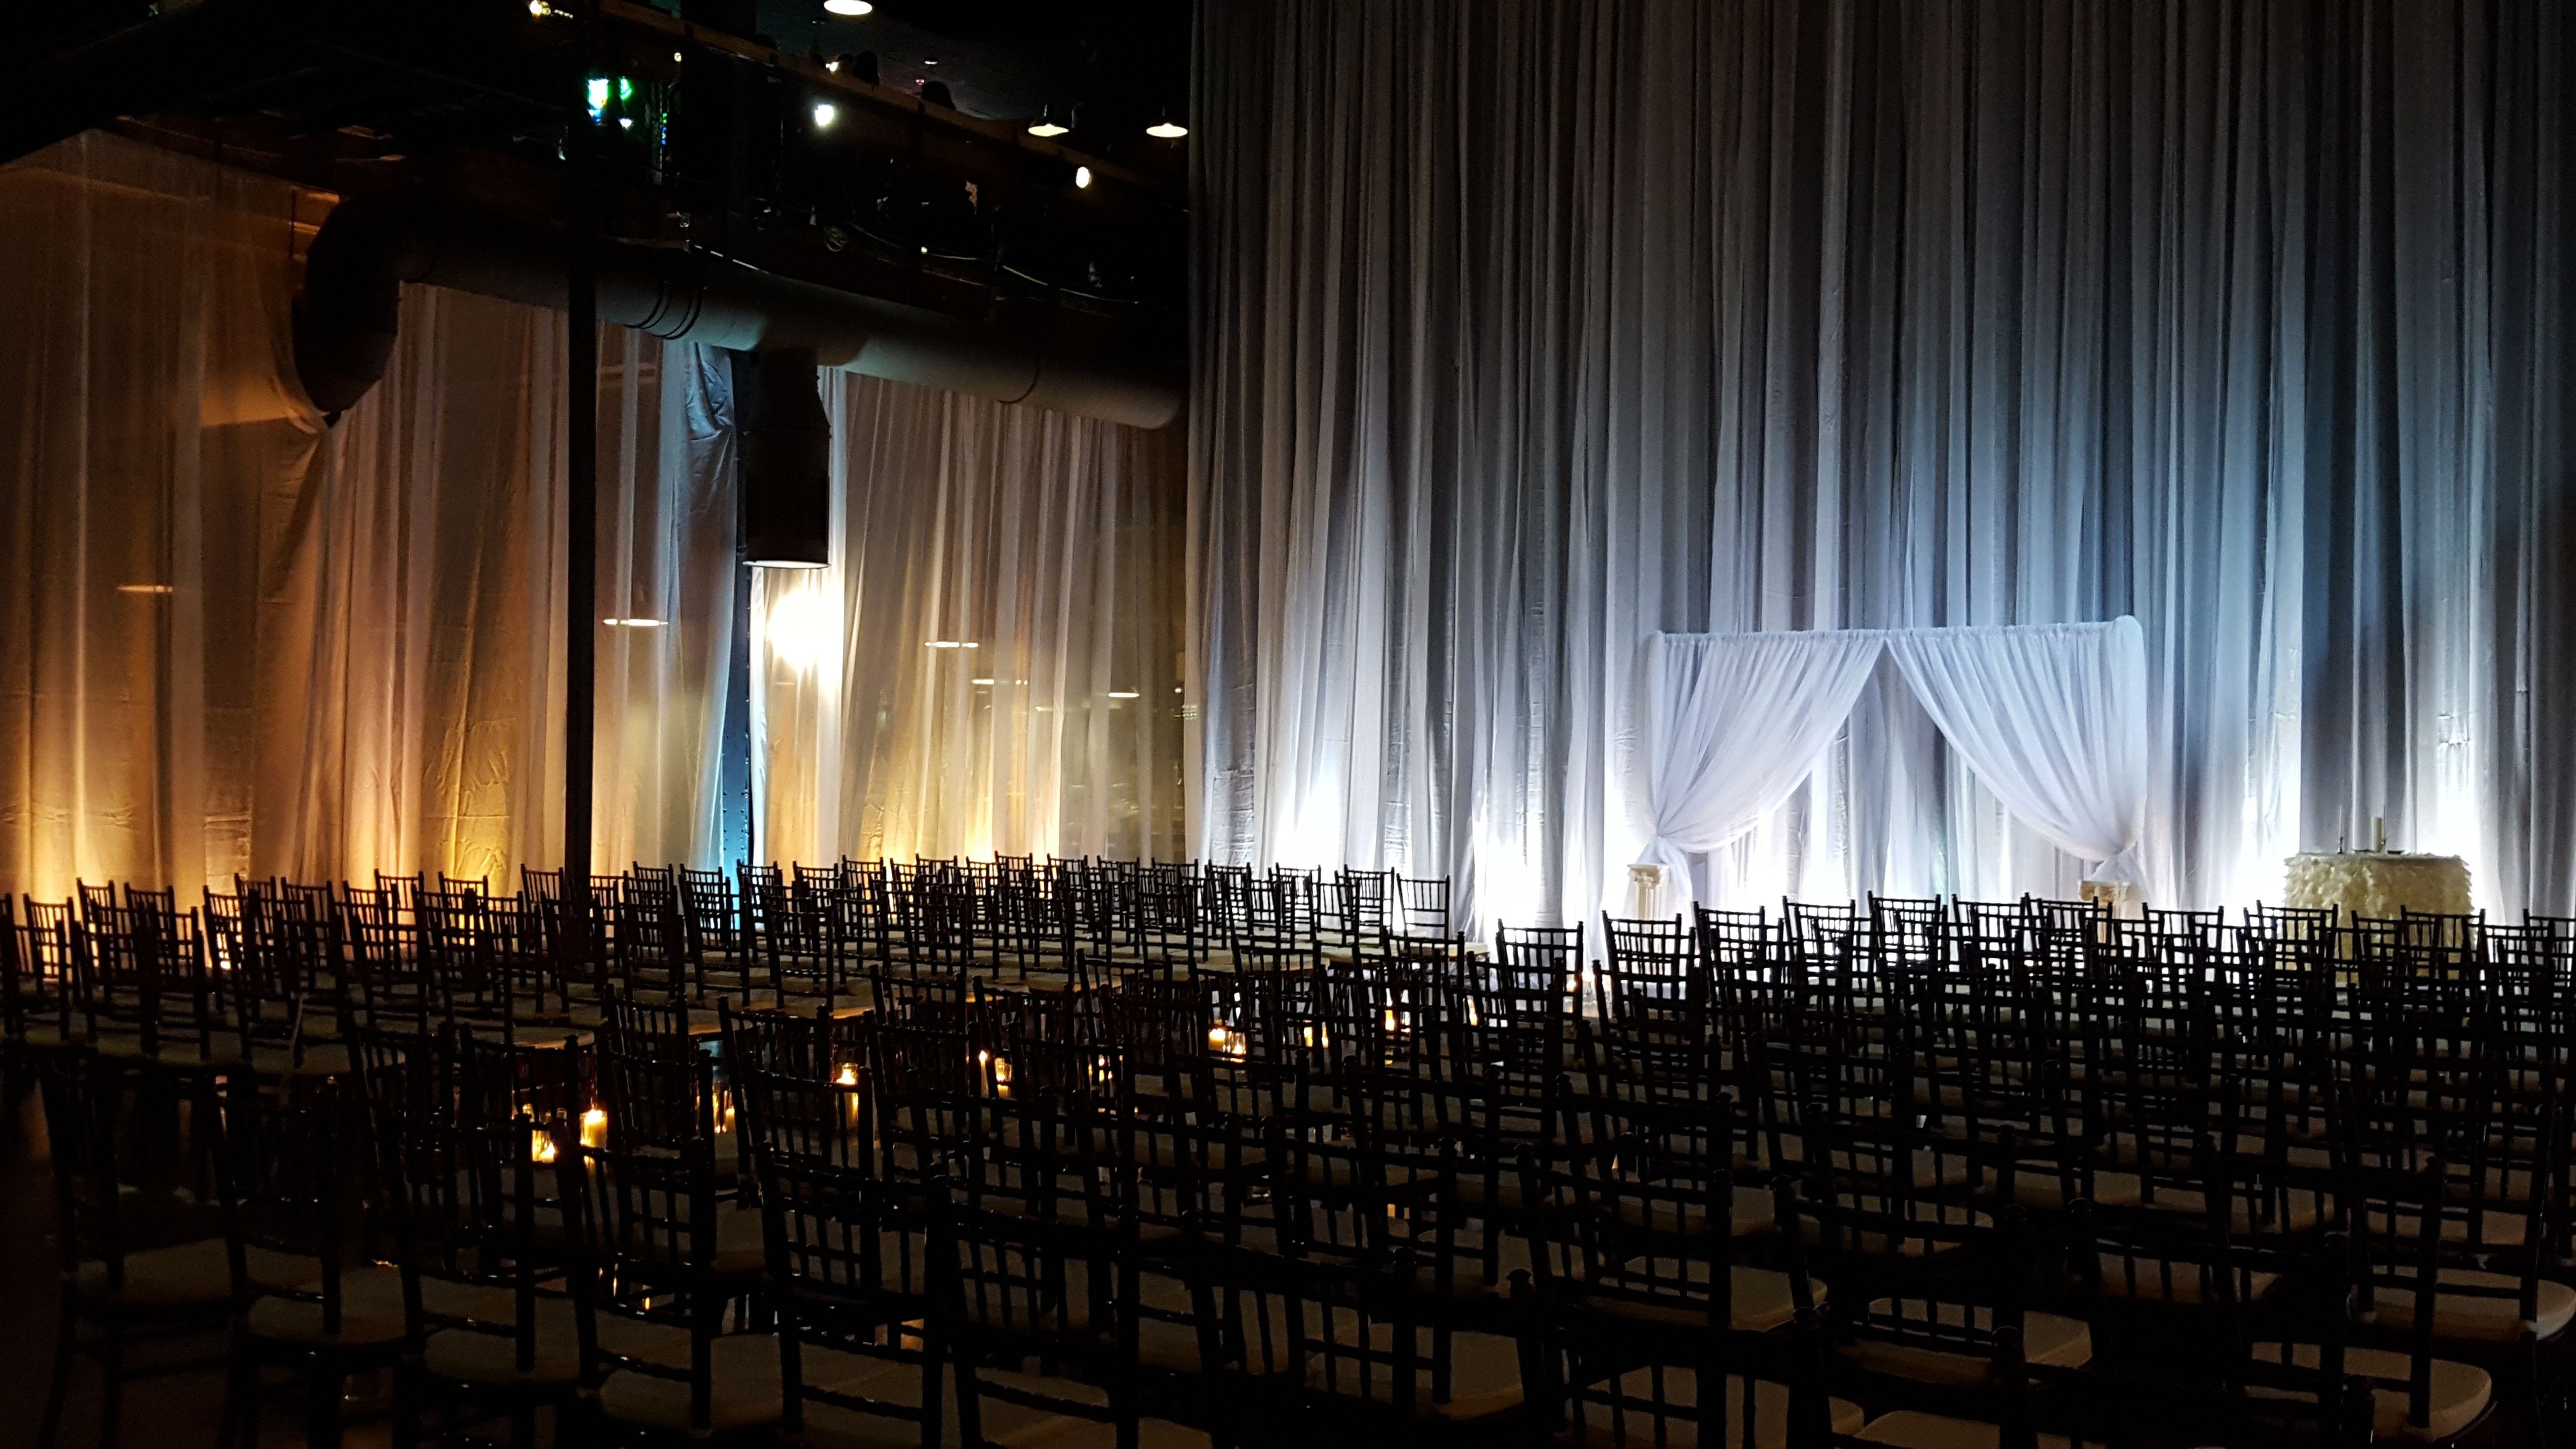 Wedding lighting at the Clyde Iron Works with tall pipe and drape with lighting.